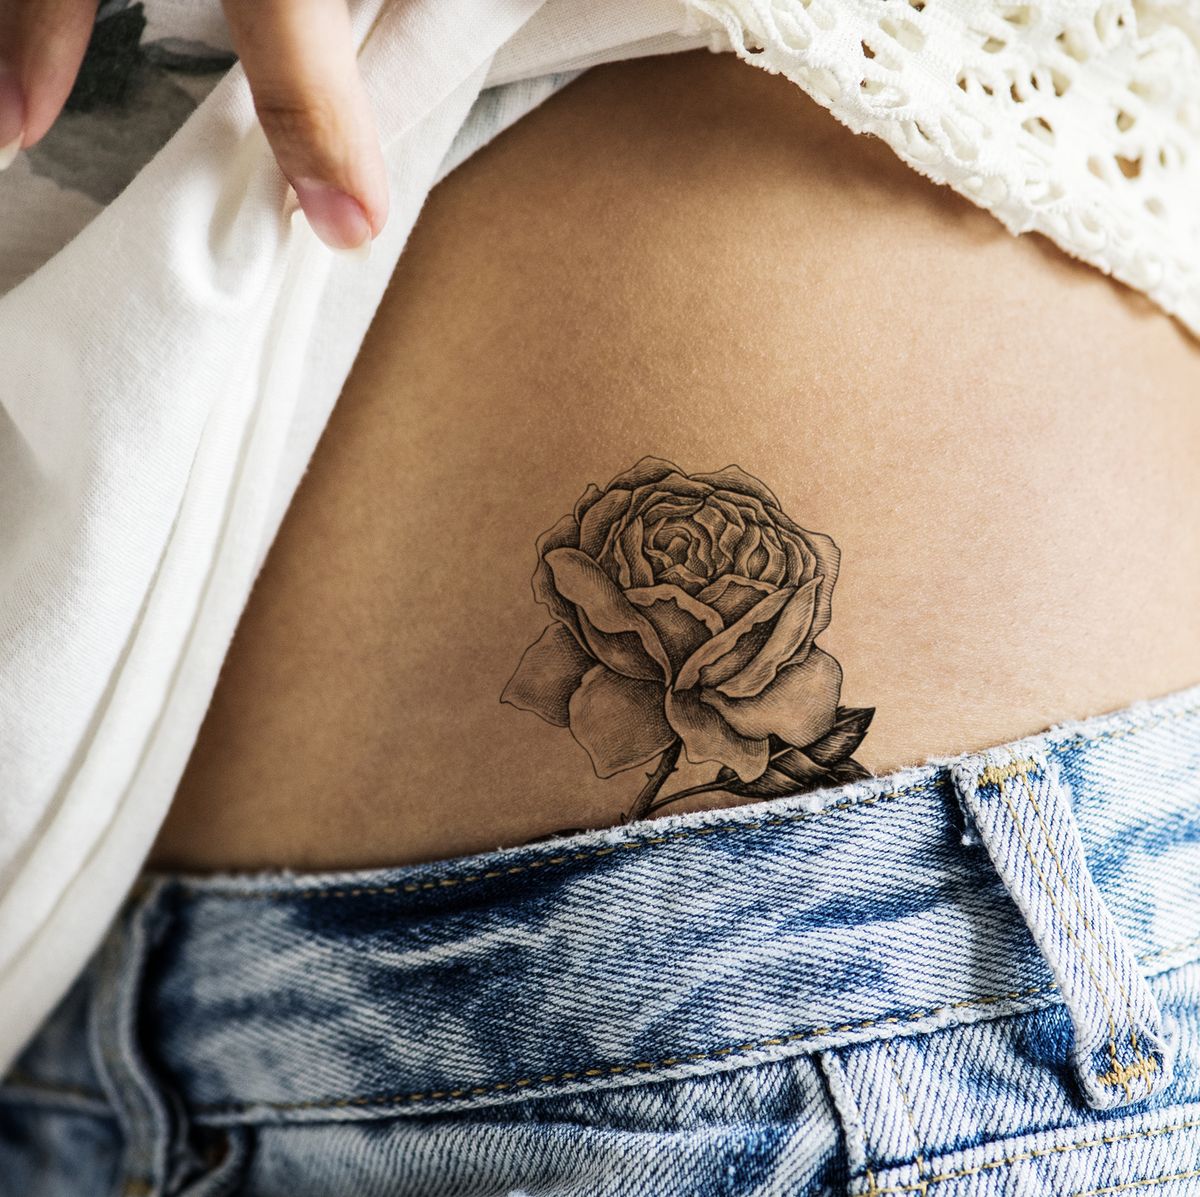 What To Do If Tattoo Gets Infected - How To Treat Infected Tattoo